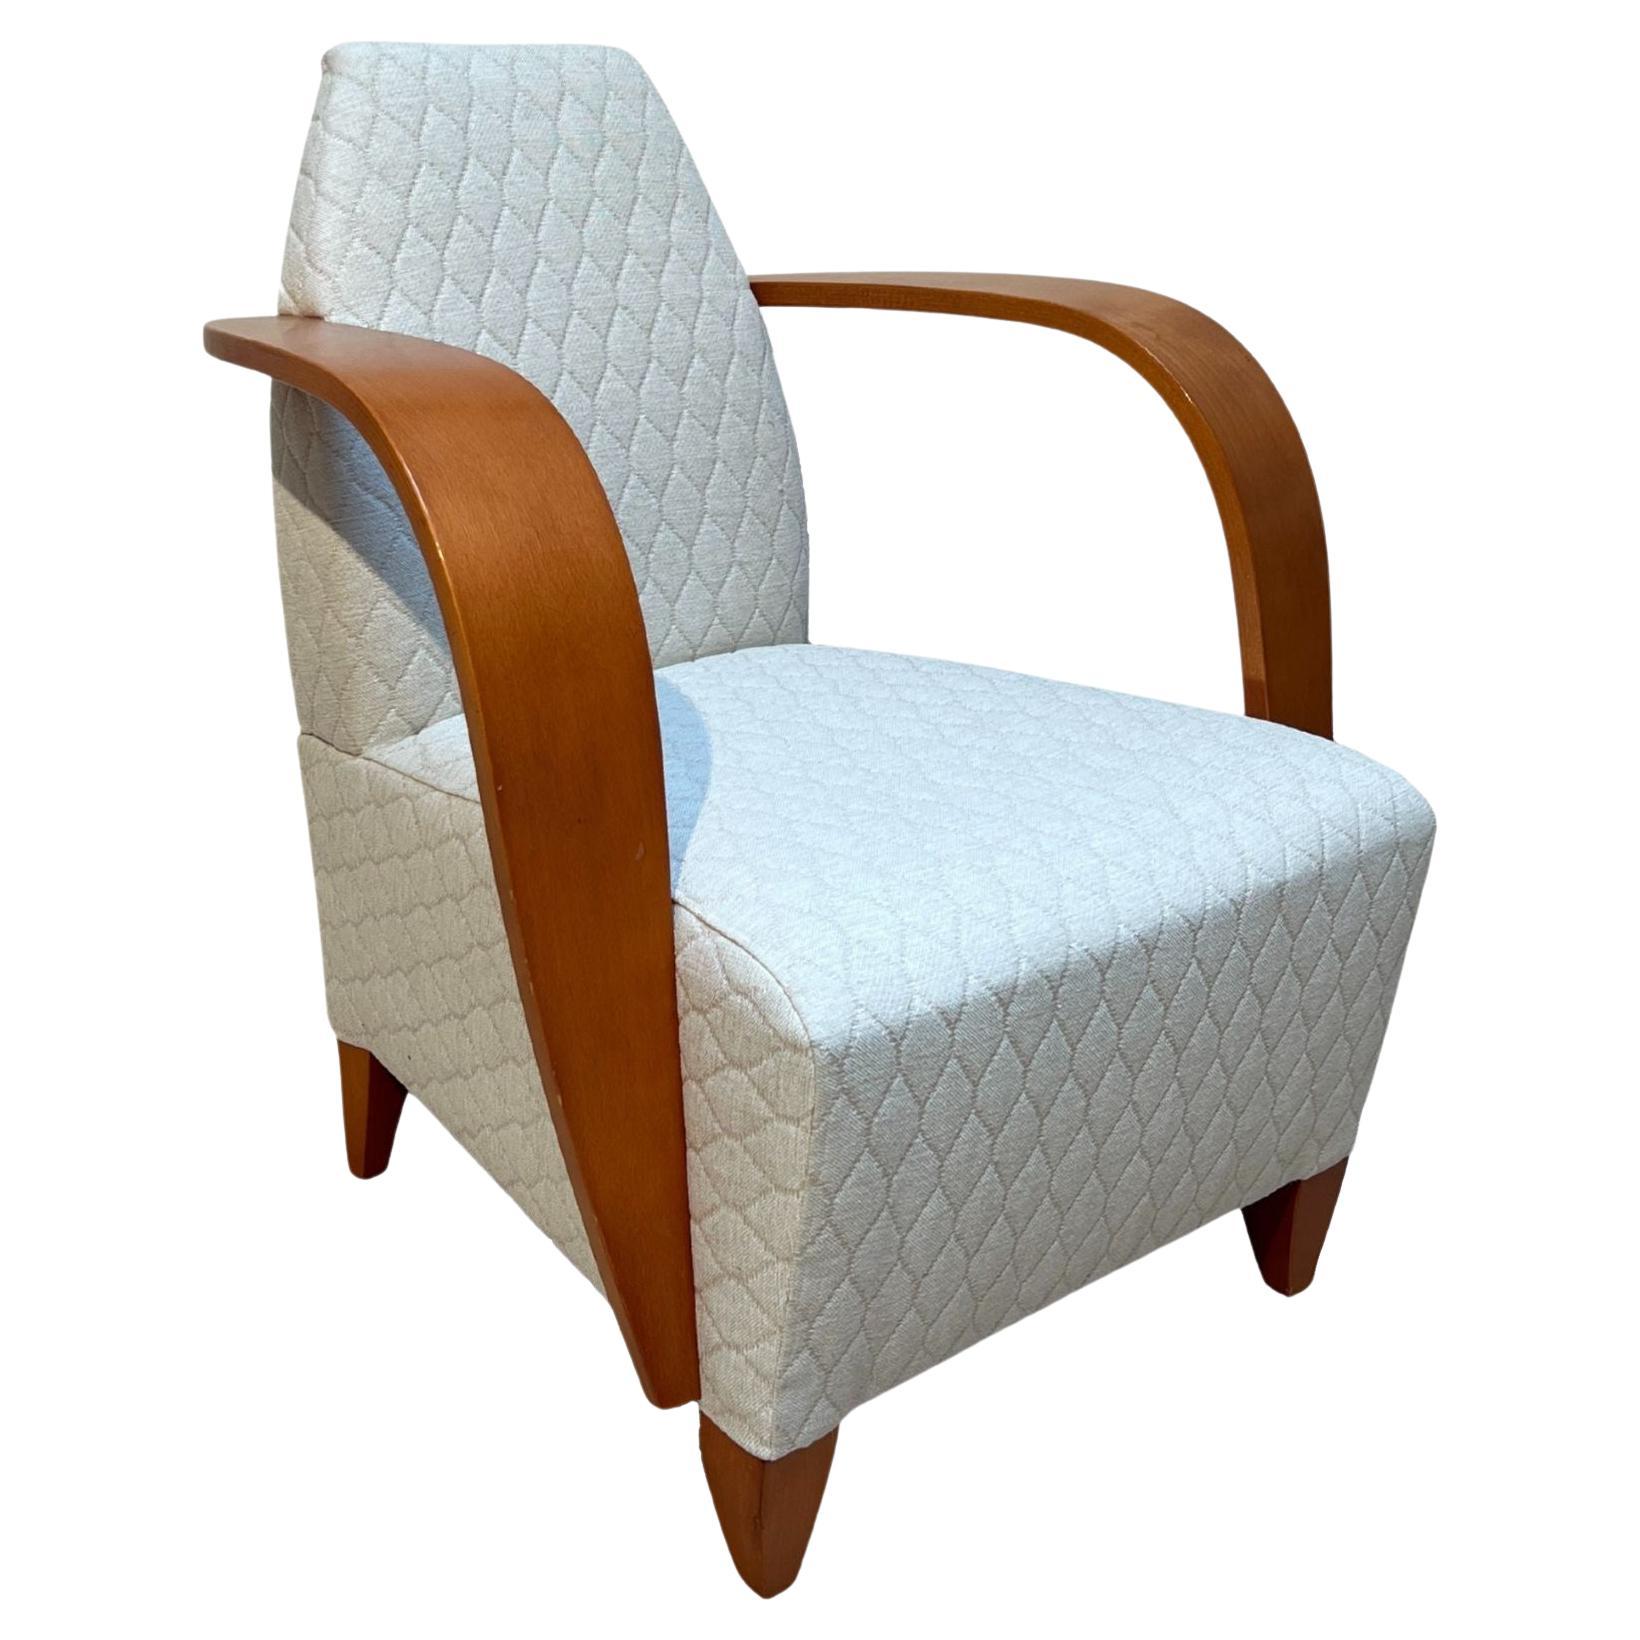 Design Arm Chair, Beech Wood, Cream-white Quilt Fabric, Spain, 1990s For Sale